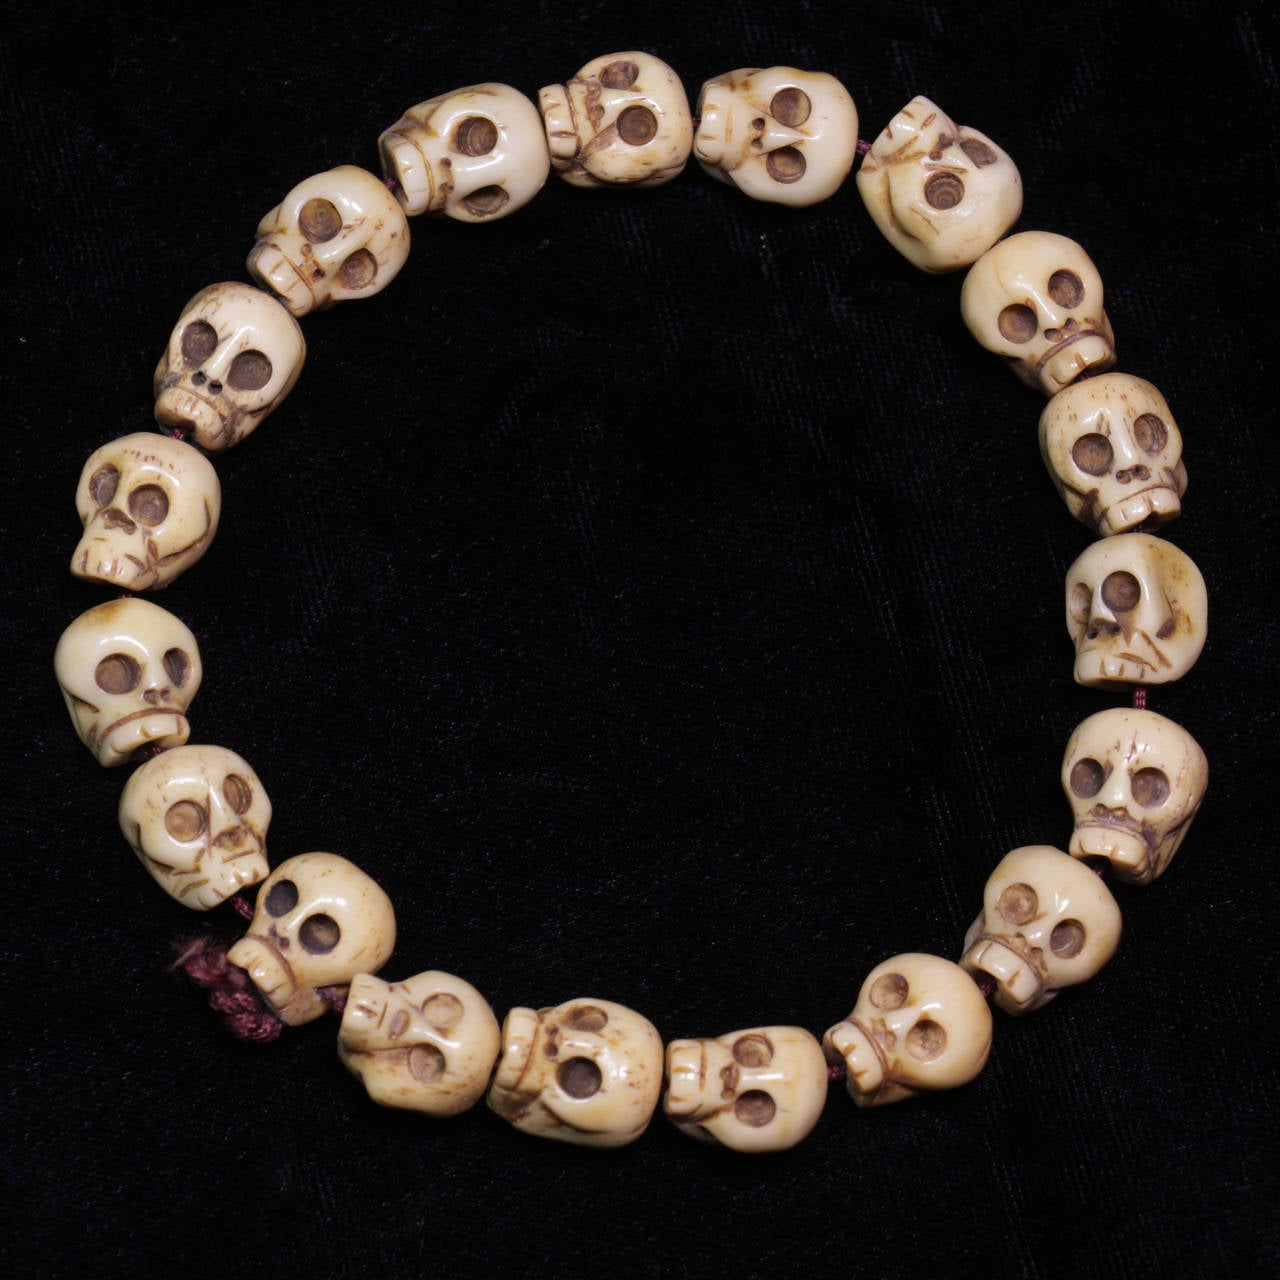 This 18th Century Tibetan rosary (mala) is made up of 19 carved beads of bone (including the head bead) each of which bears the likeness of a human skull. This rosary would be used in certain tantric rituals and help remind one of the impermanence